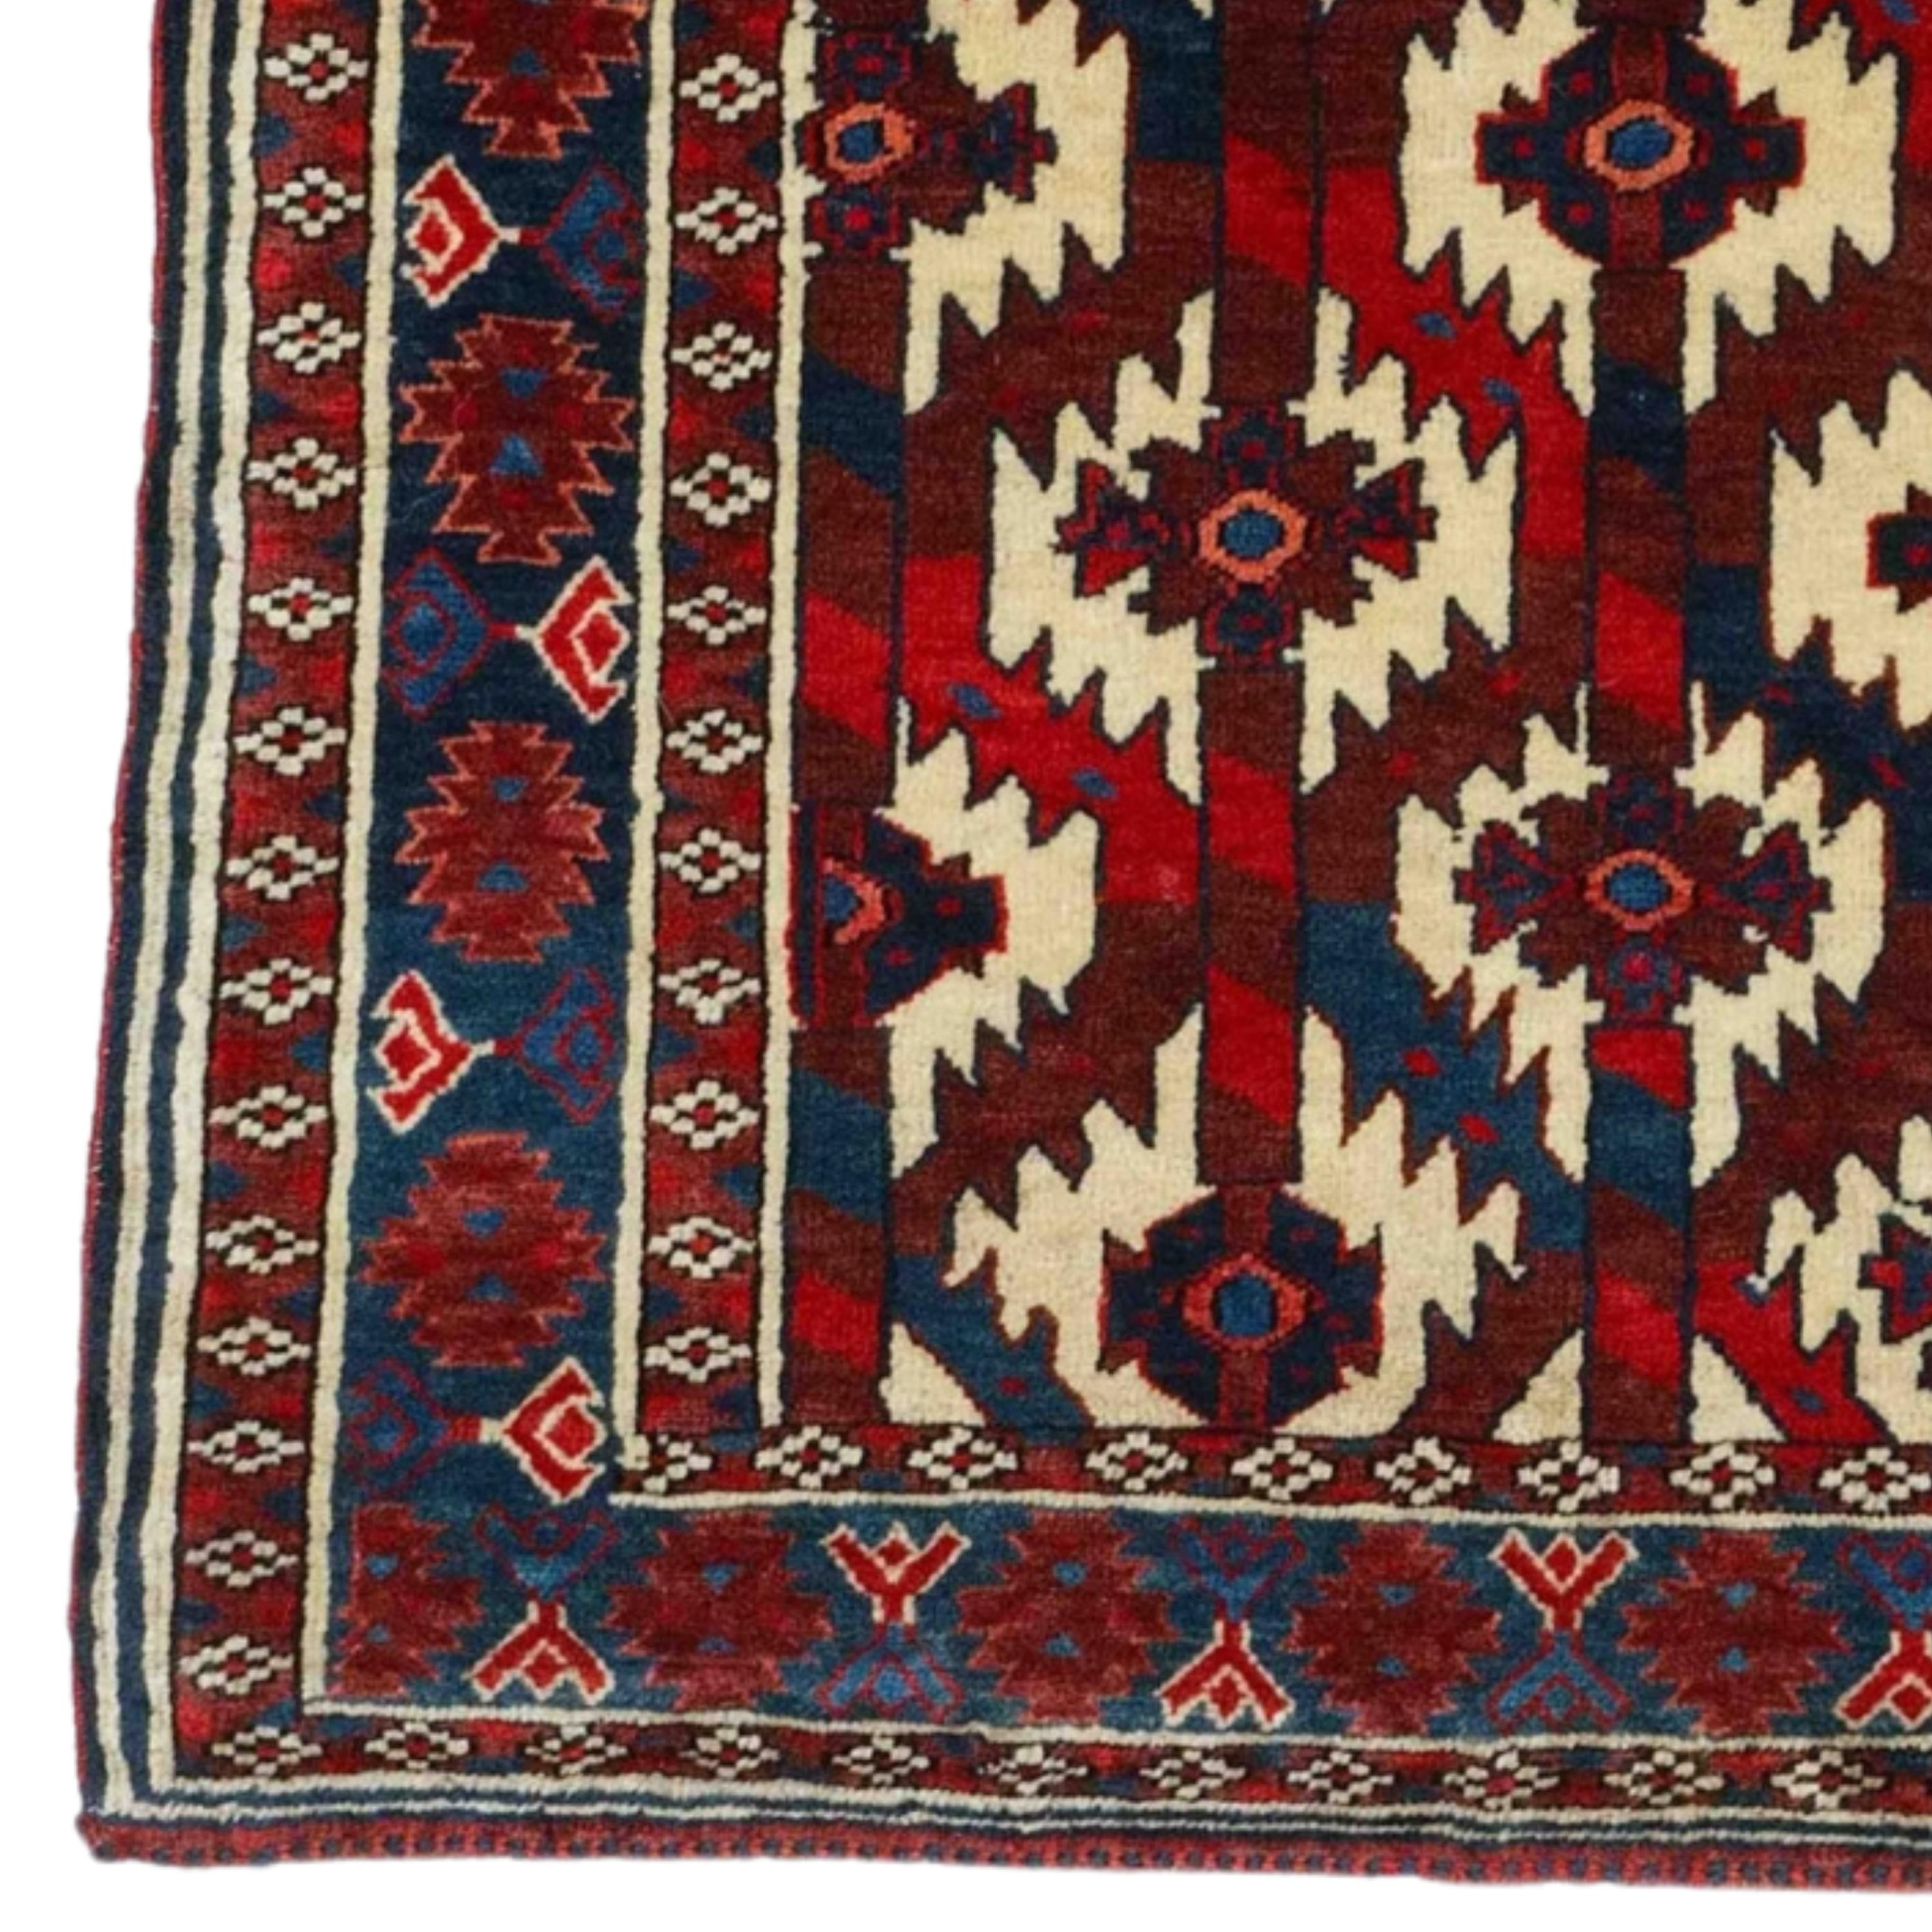 This elegant 19th century Yamud Hanging carpet is a work of art that will enrich any space with its carefully chosen color palette and sophisticated patterns. Offering the harmony of red, blue and white, this antique piece is a reflection of